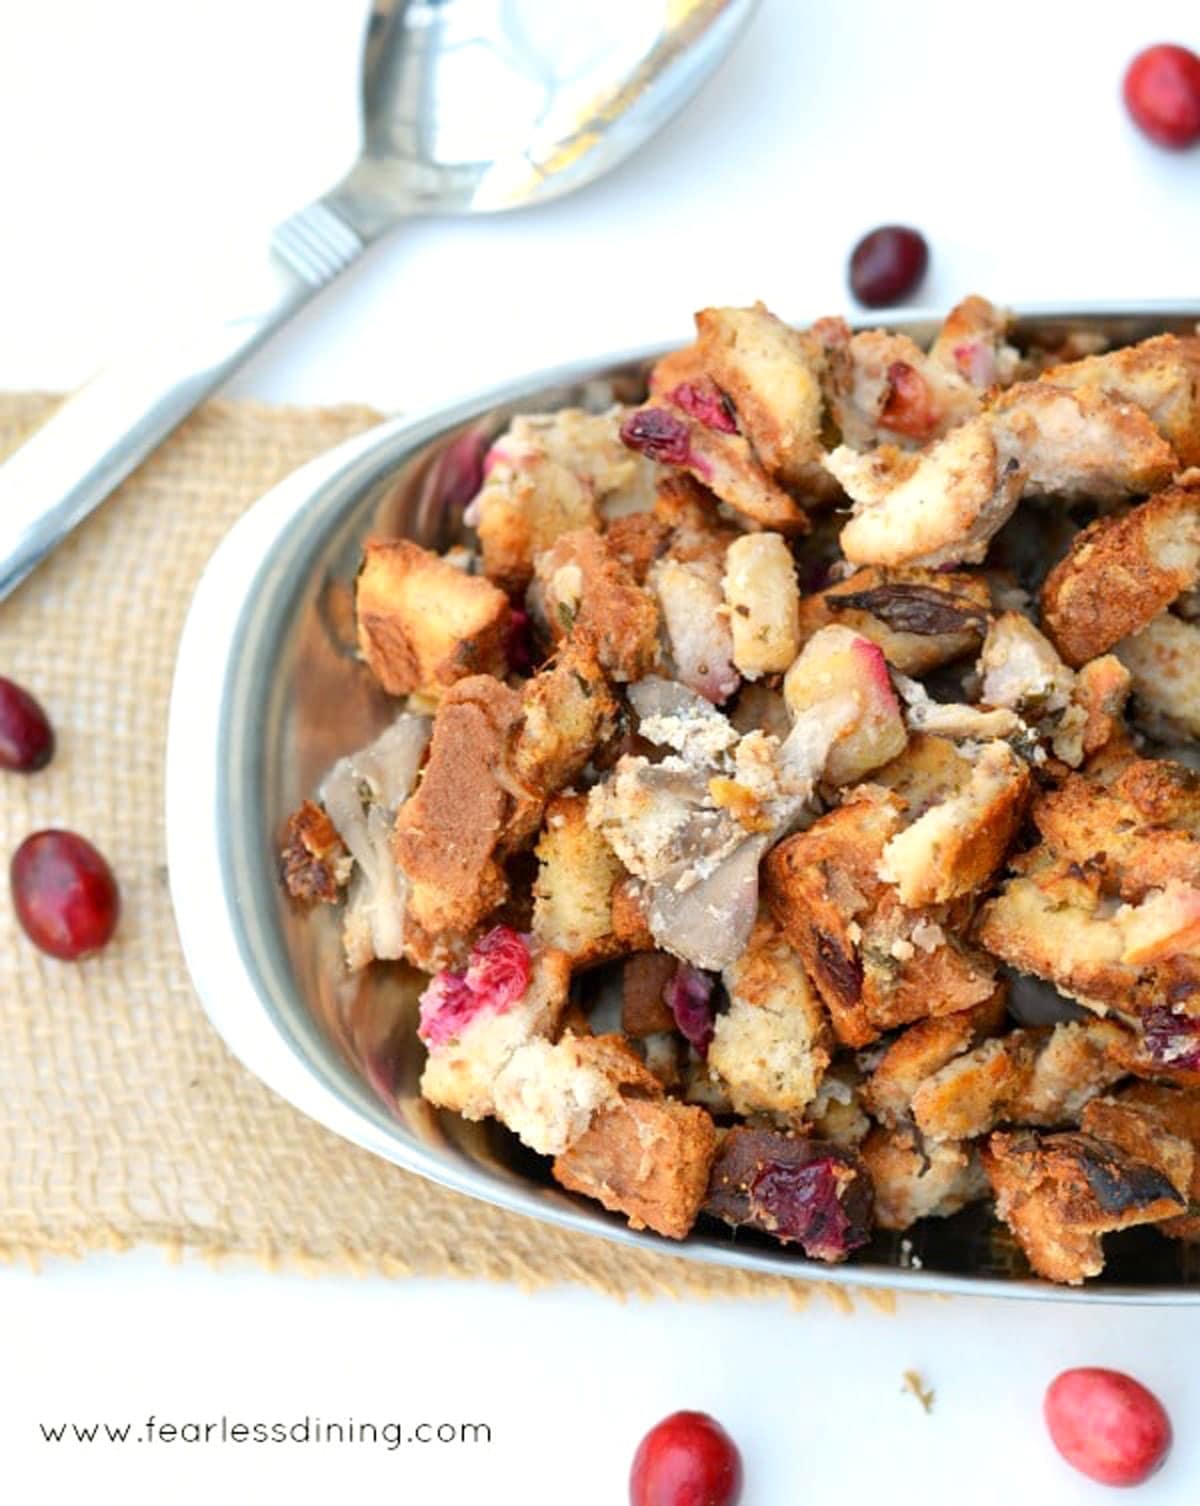 cranberry stuffing in a silver serving bowl